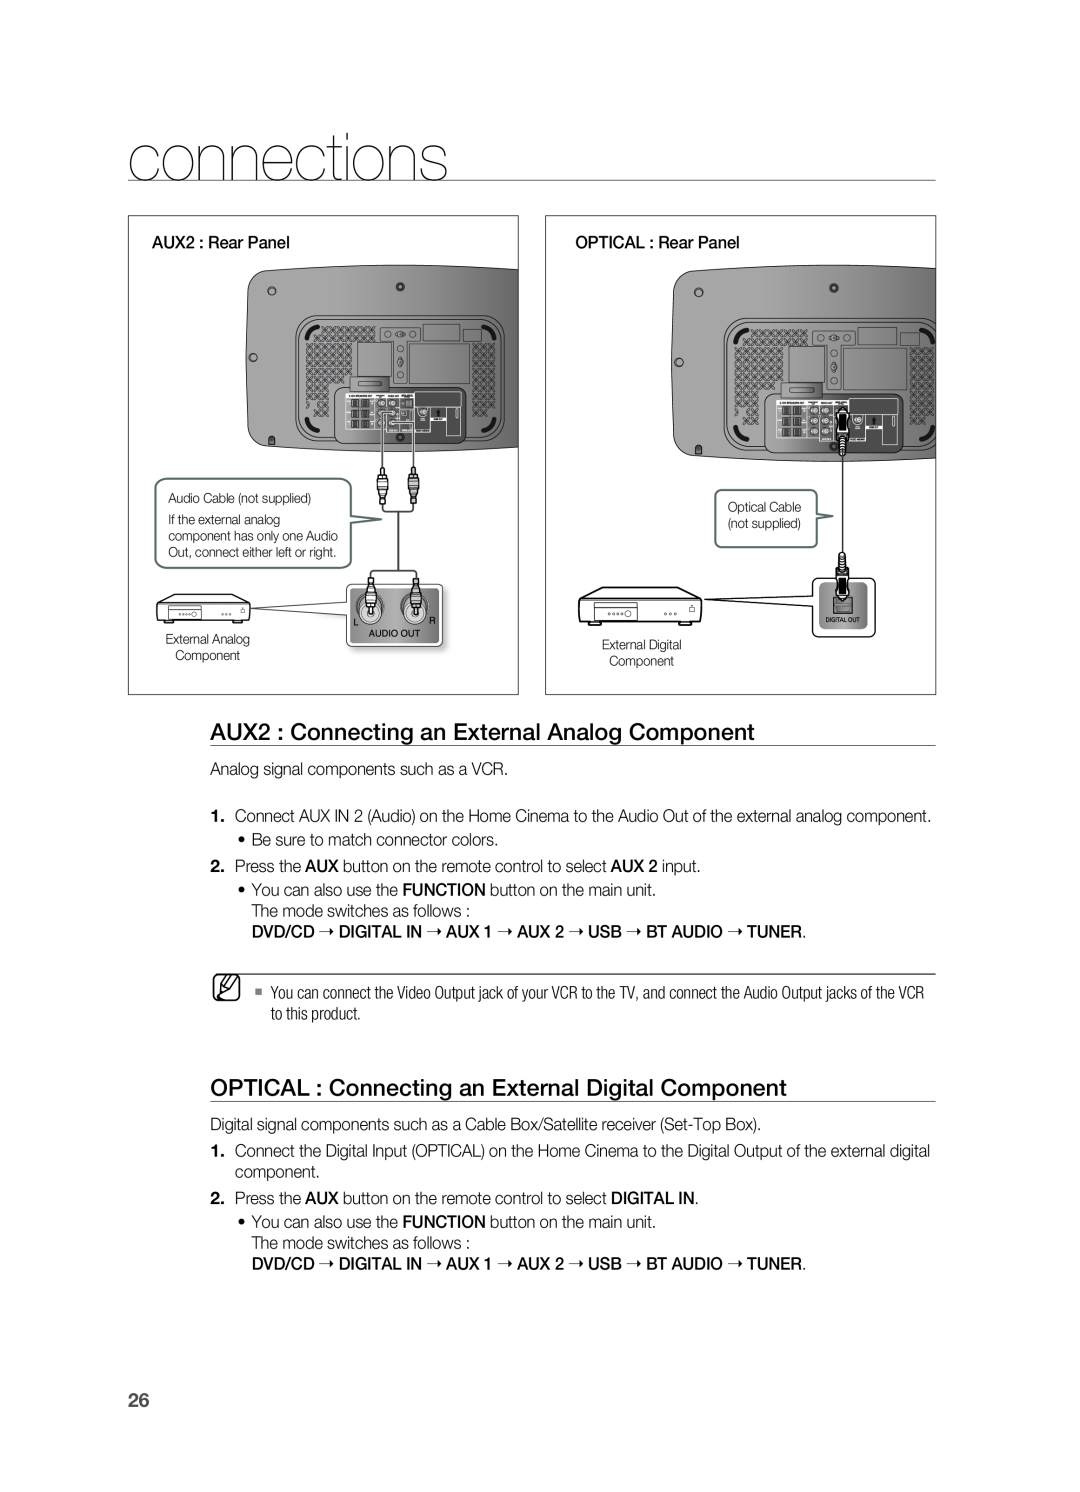 Samsung HT-TX715 user manual connections, AUX2 Connecting an External Analog Component 